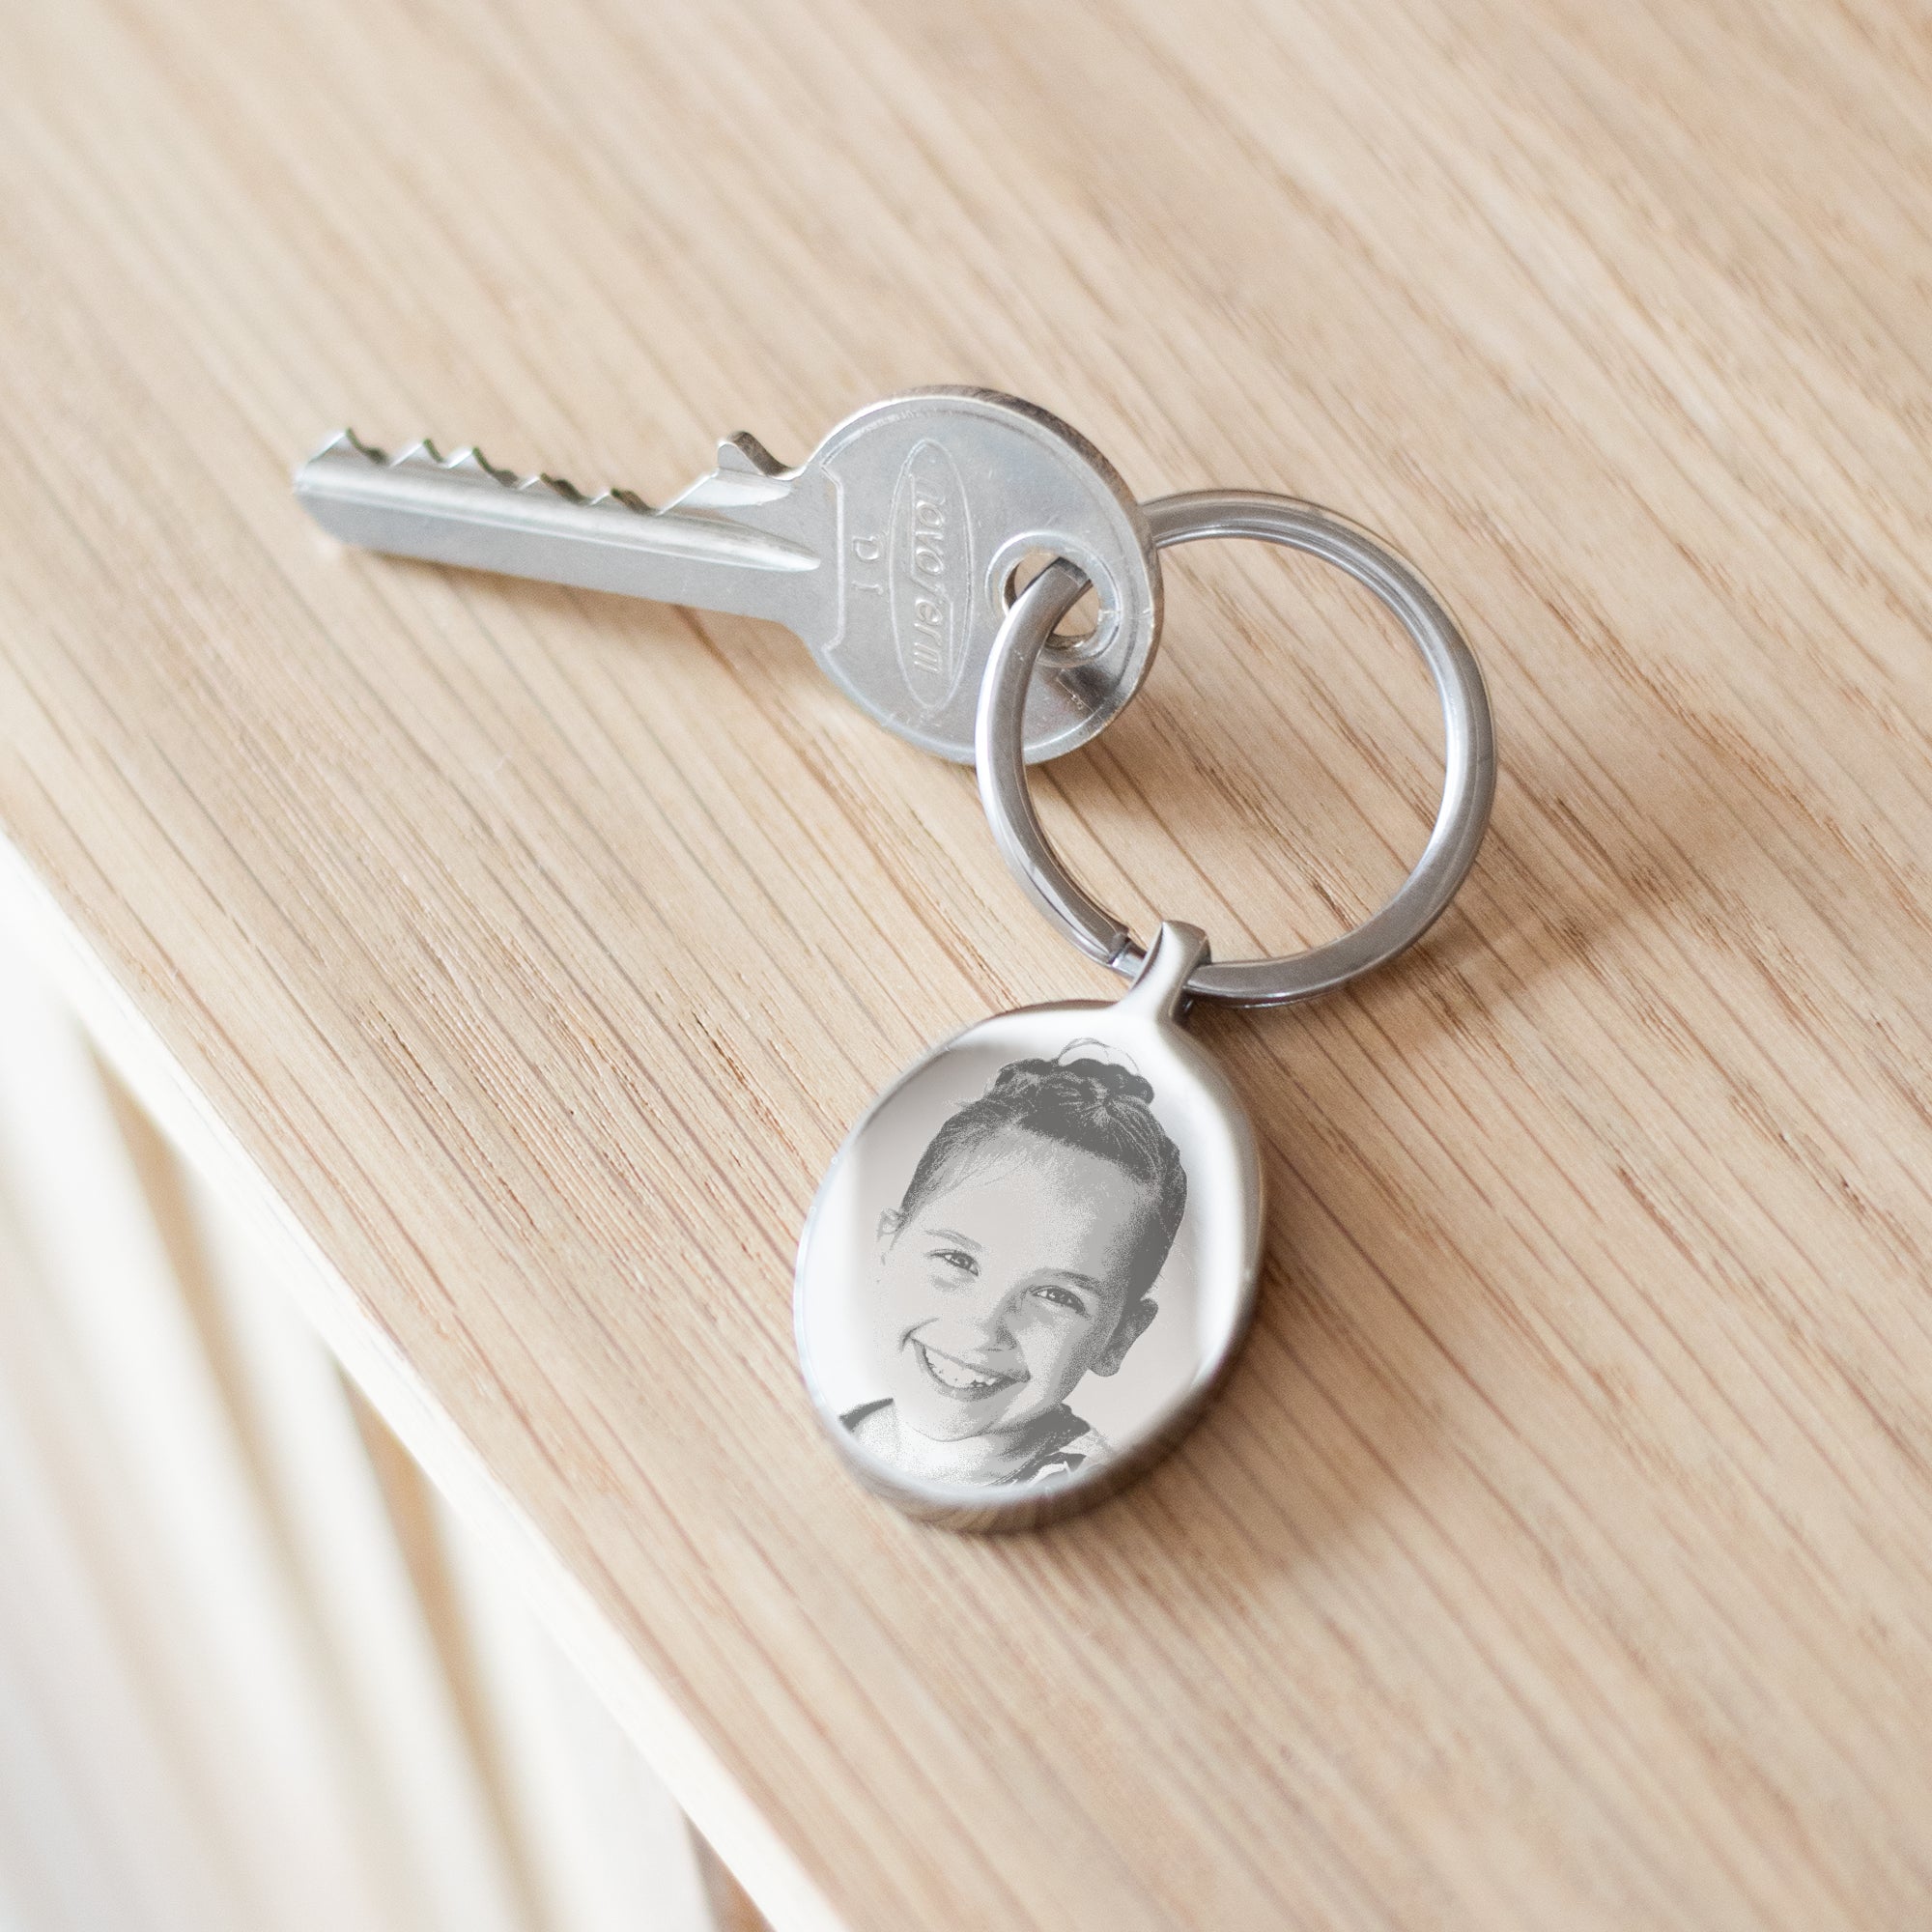 Personalised key ring - Oval - Stainless steel - Engraved